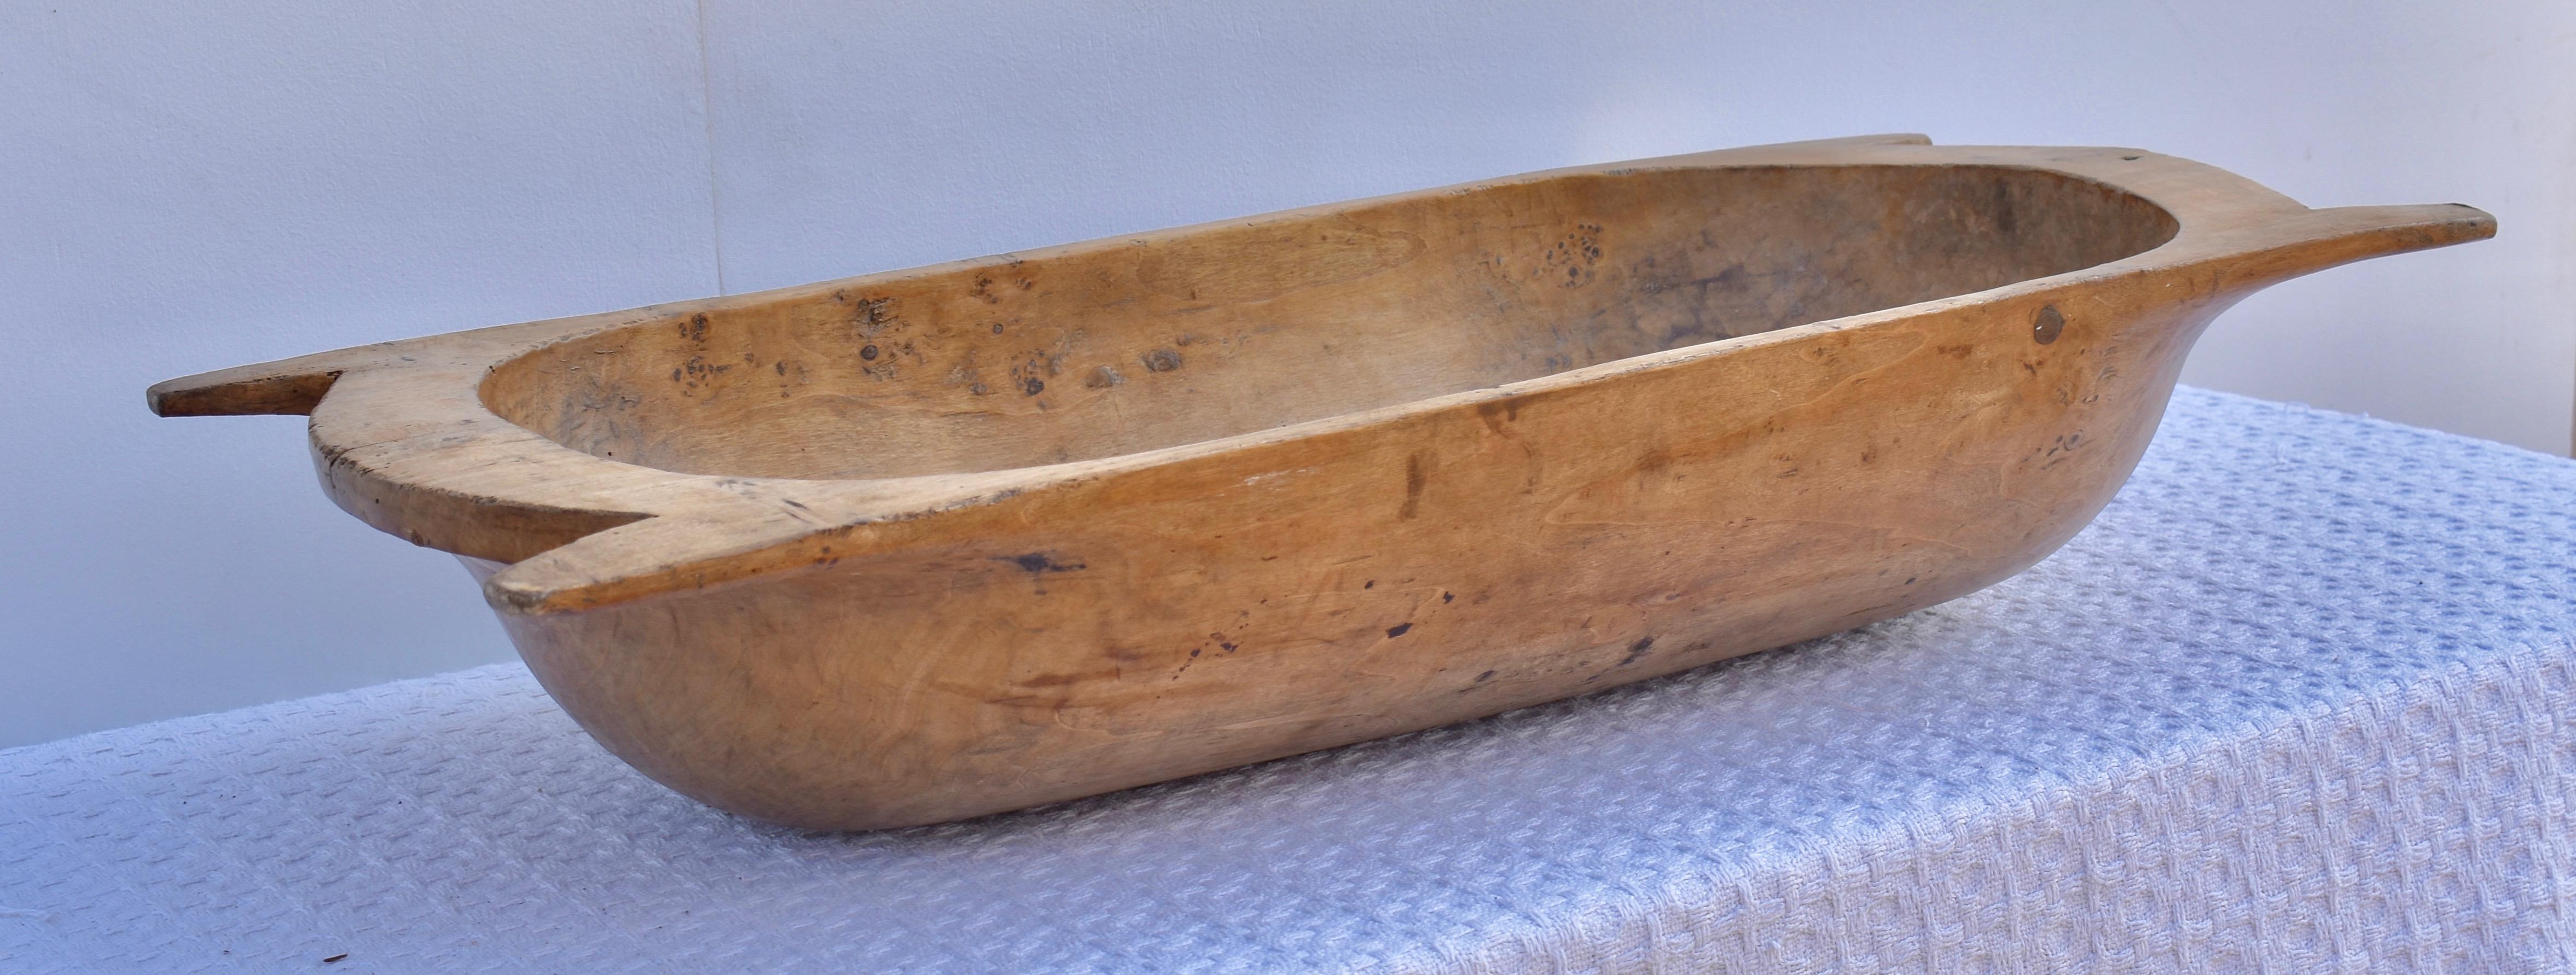 Country Hand-Hewn Fruitwood Trog or Dough Bowl